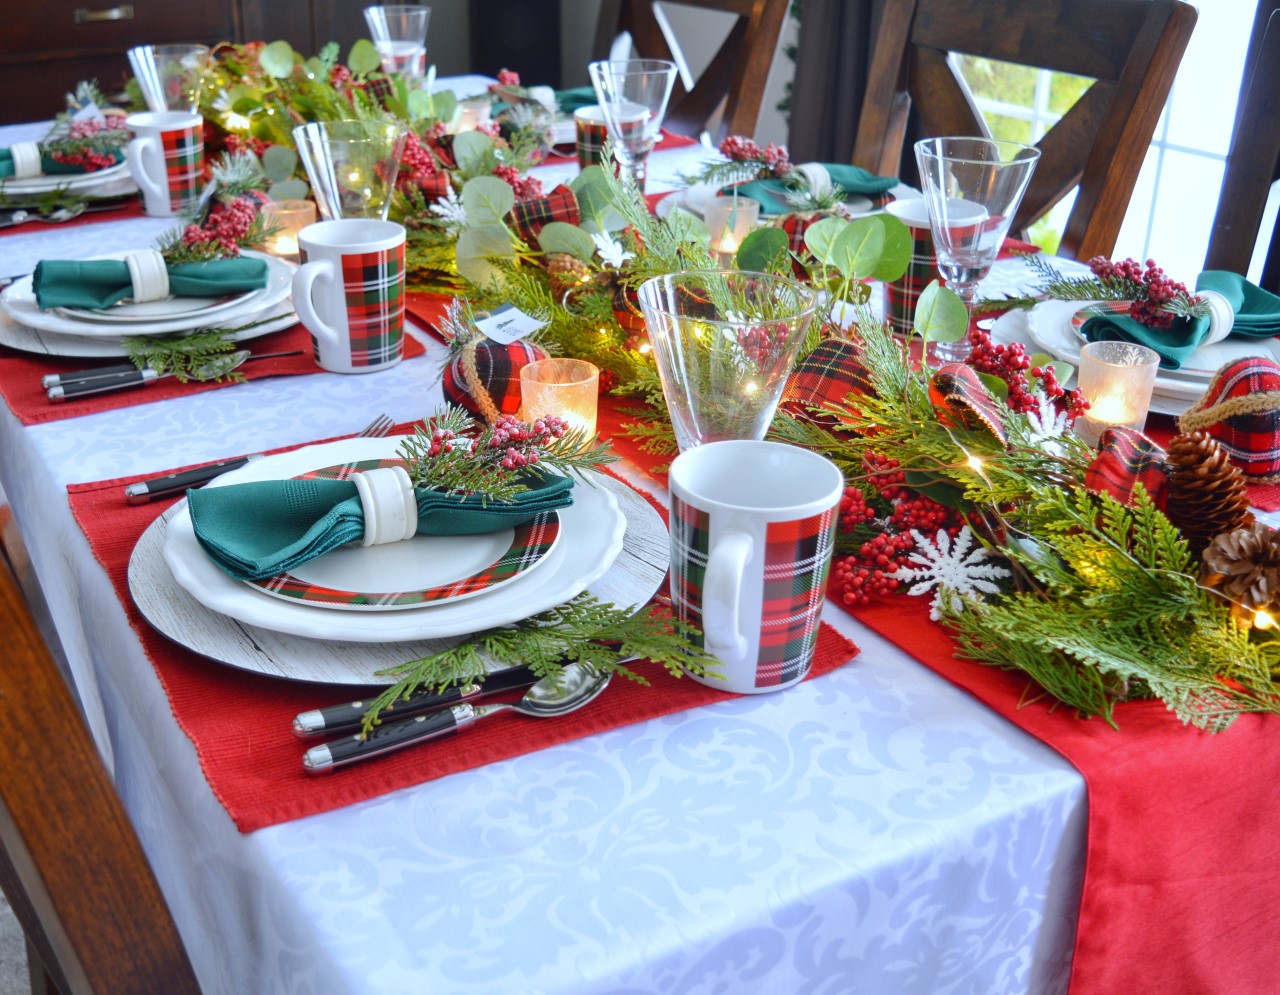 Red Gingham Ribbon - Perfect Tables